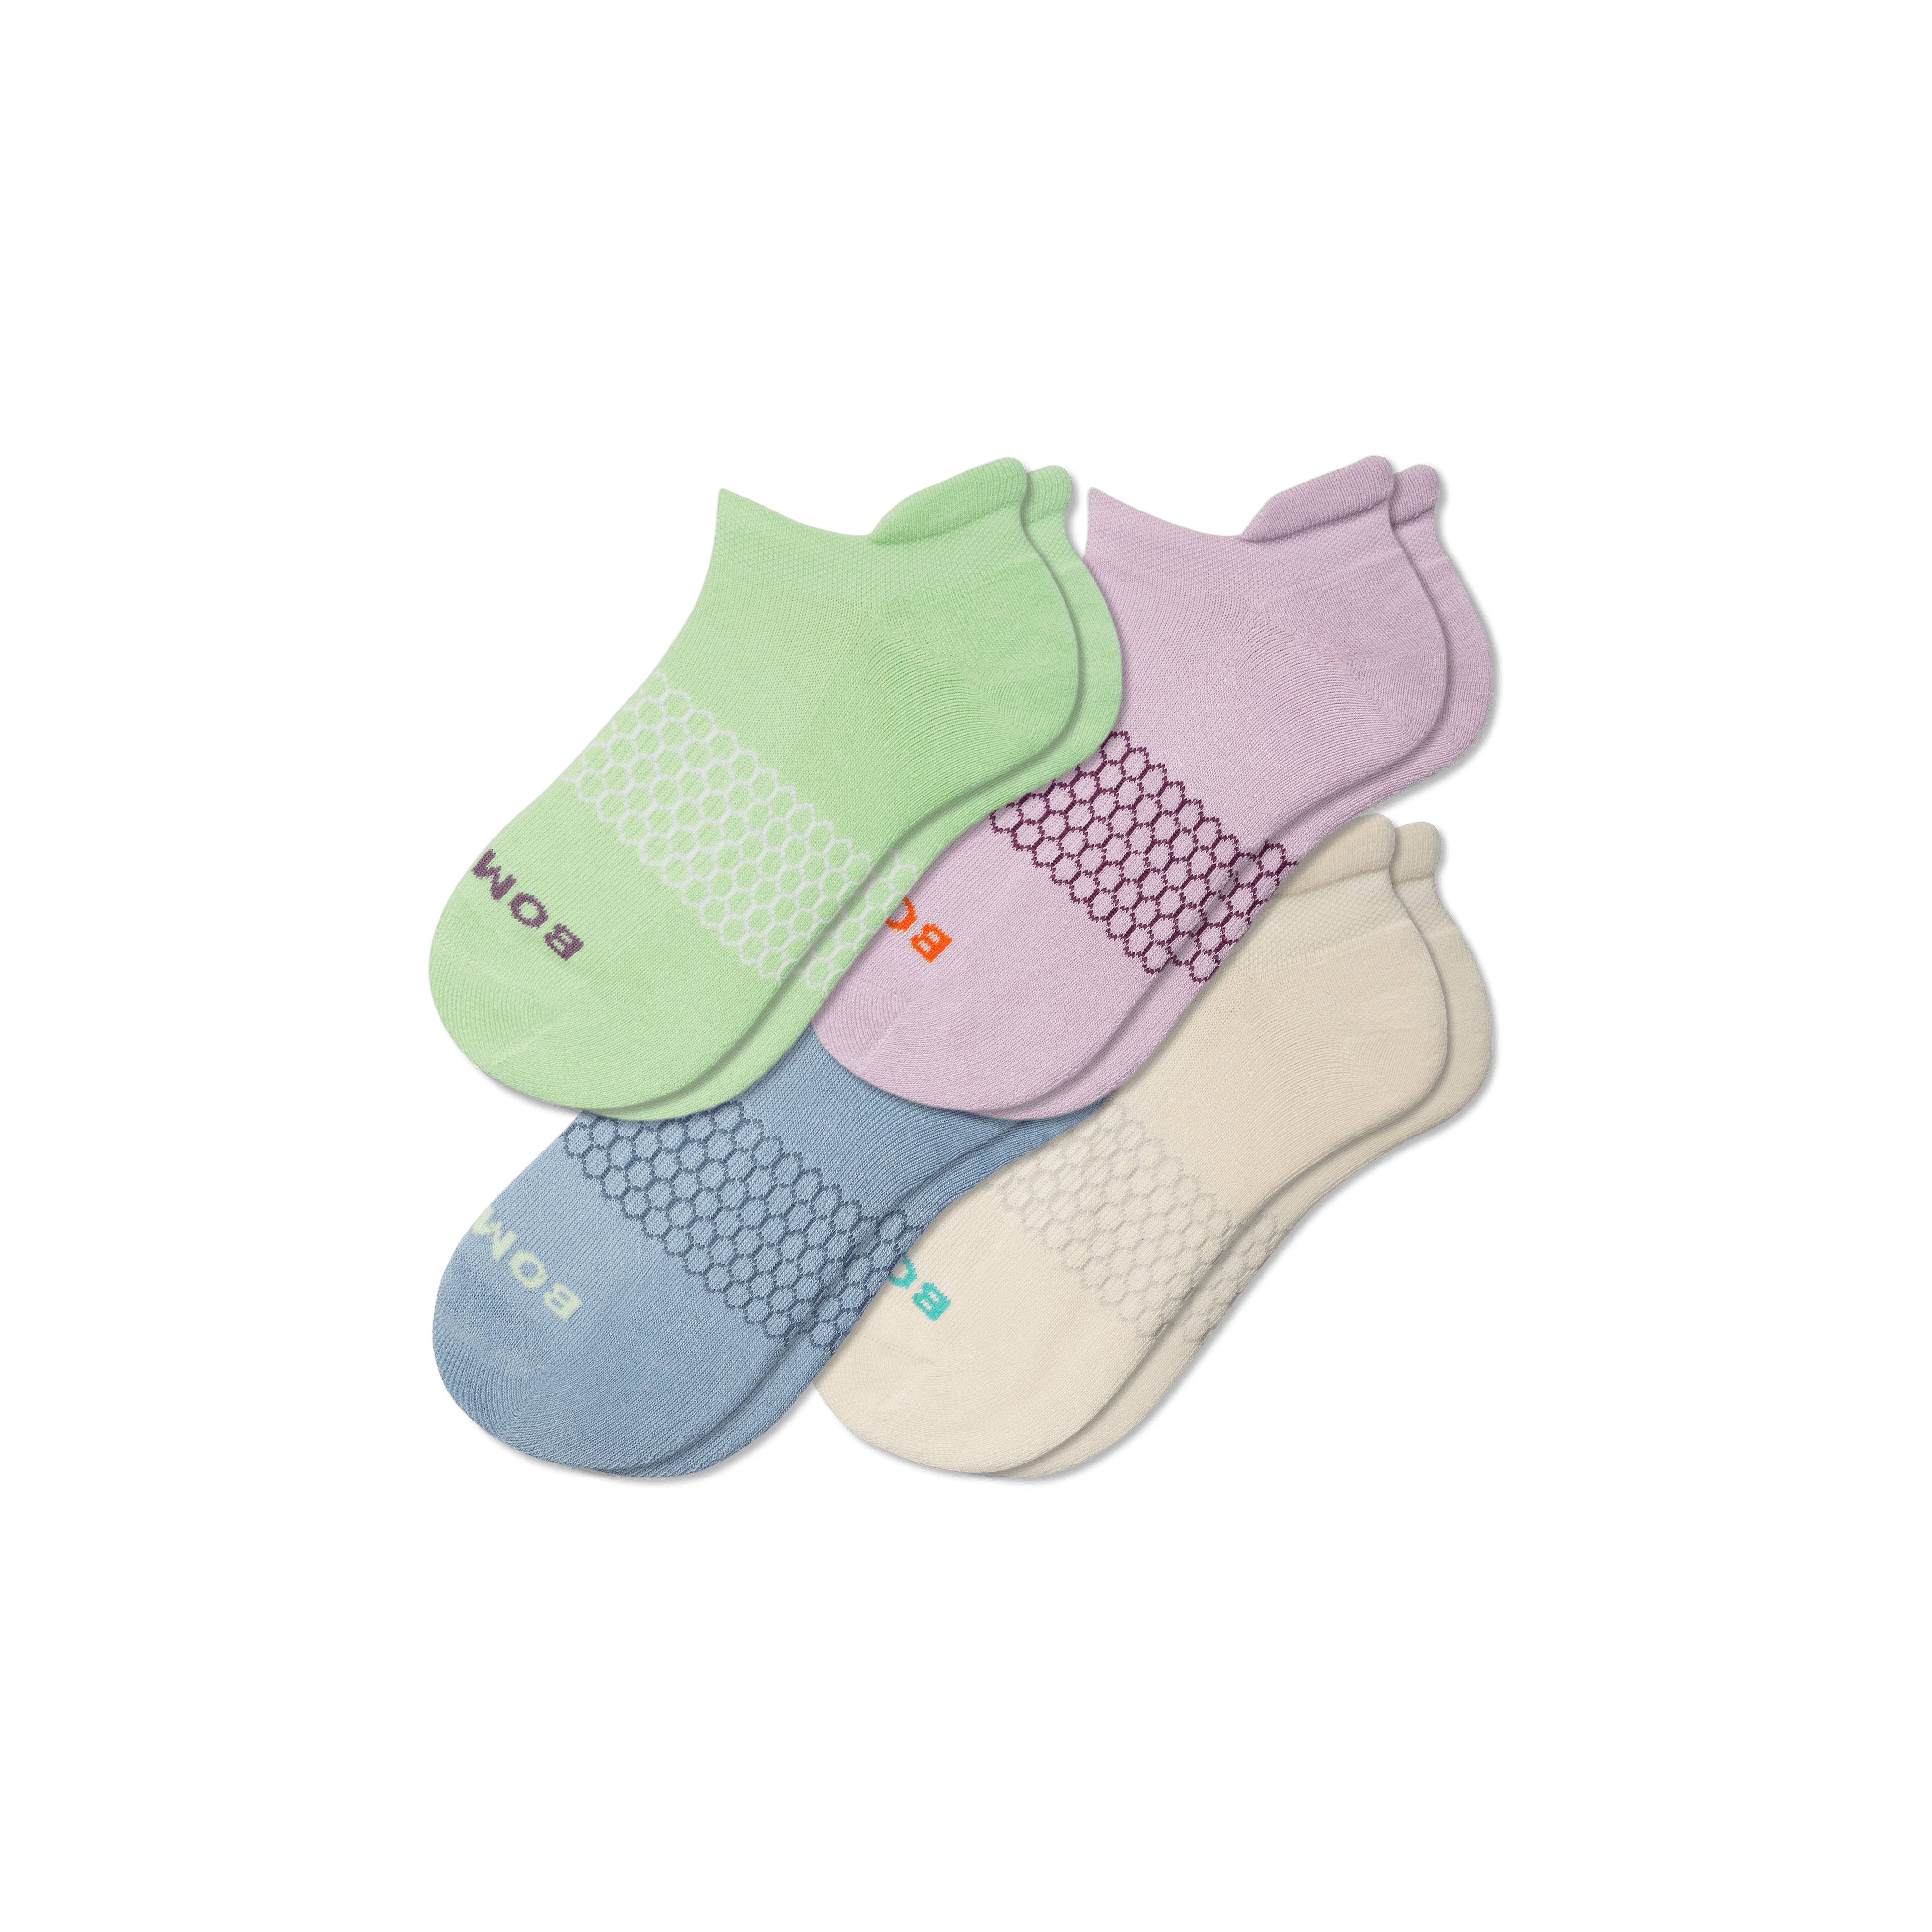 Bombas Solids Ankle Sock 4-pack In Mint Lavender Mix